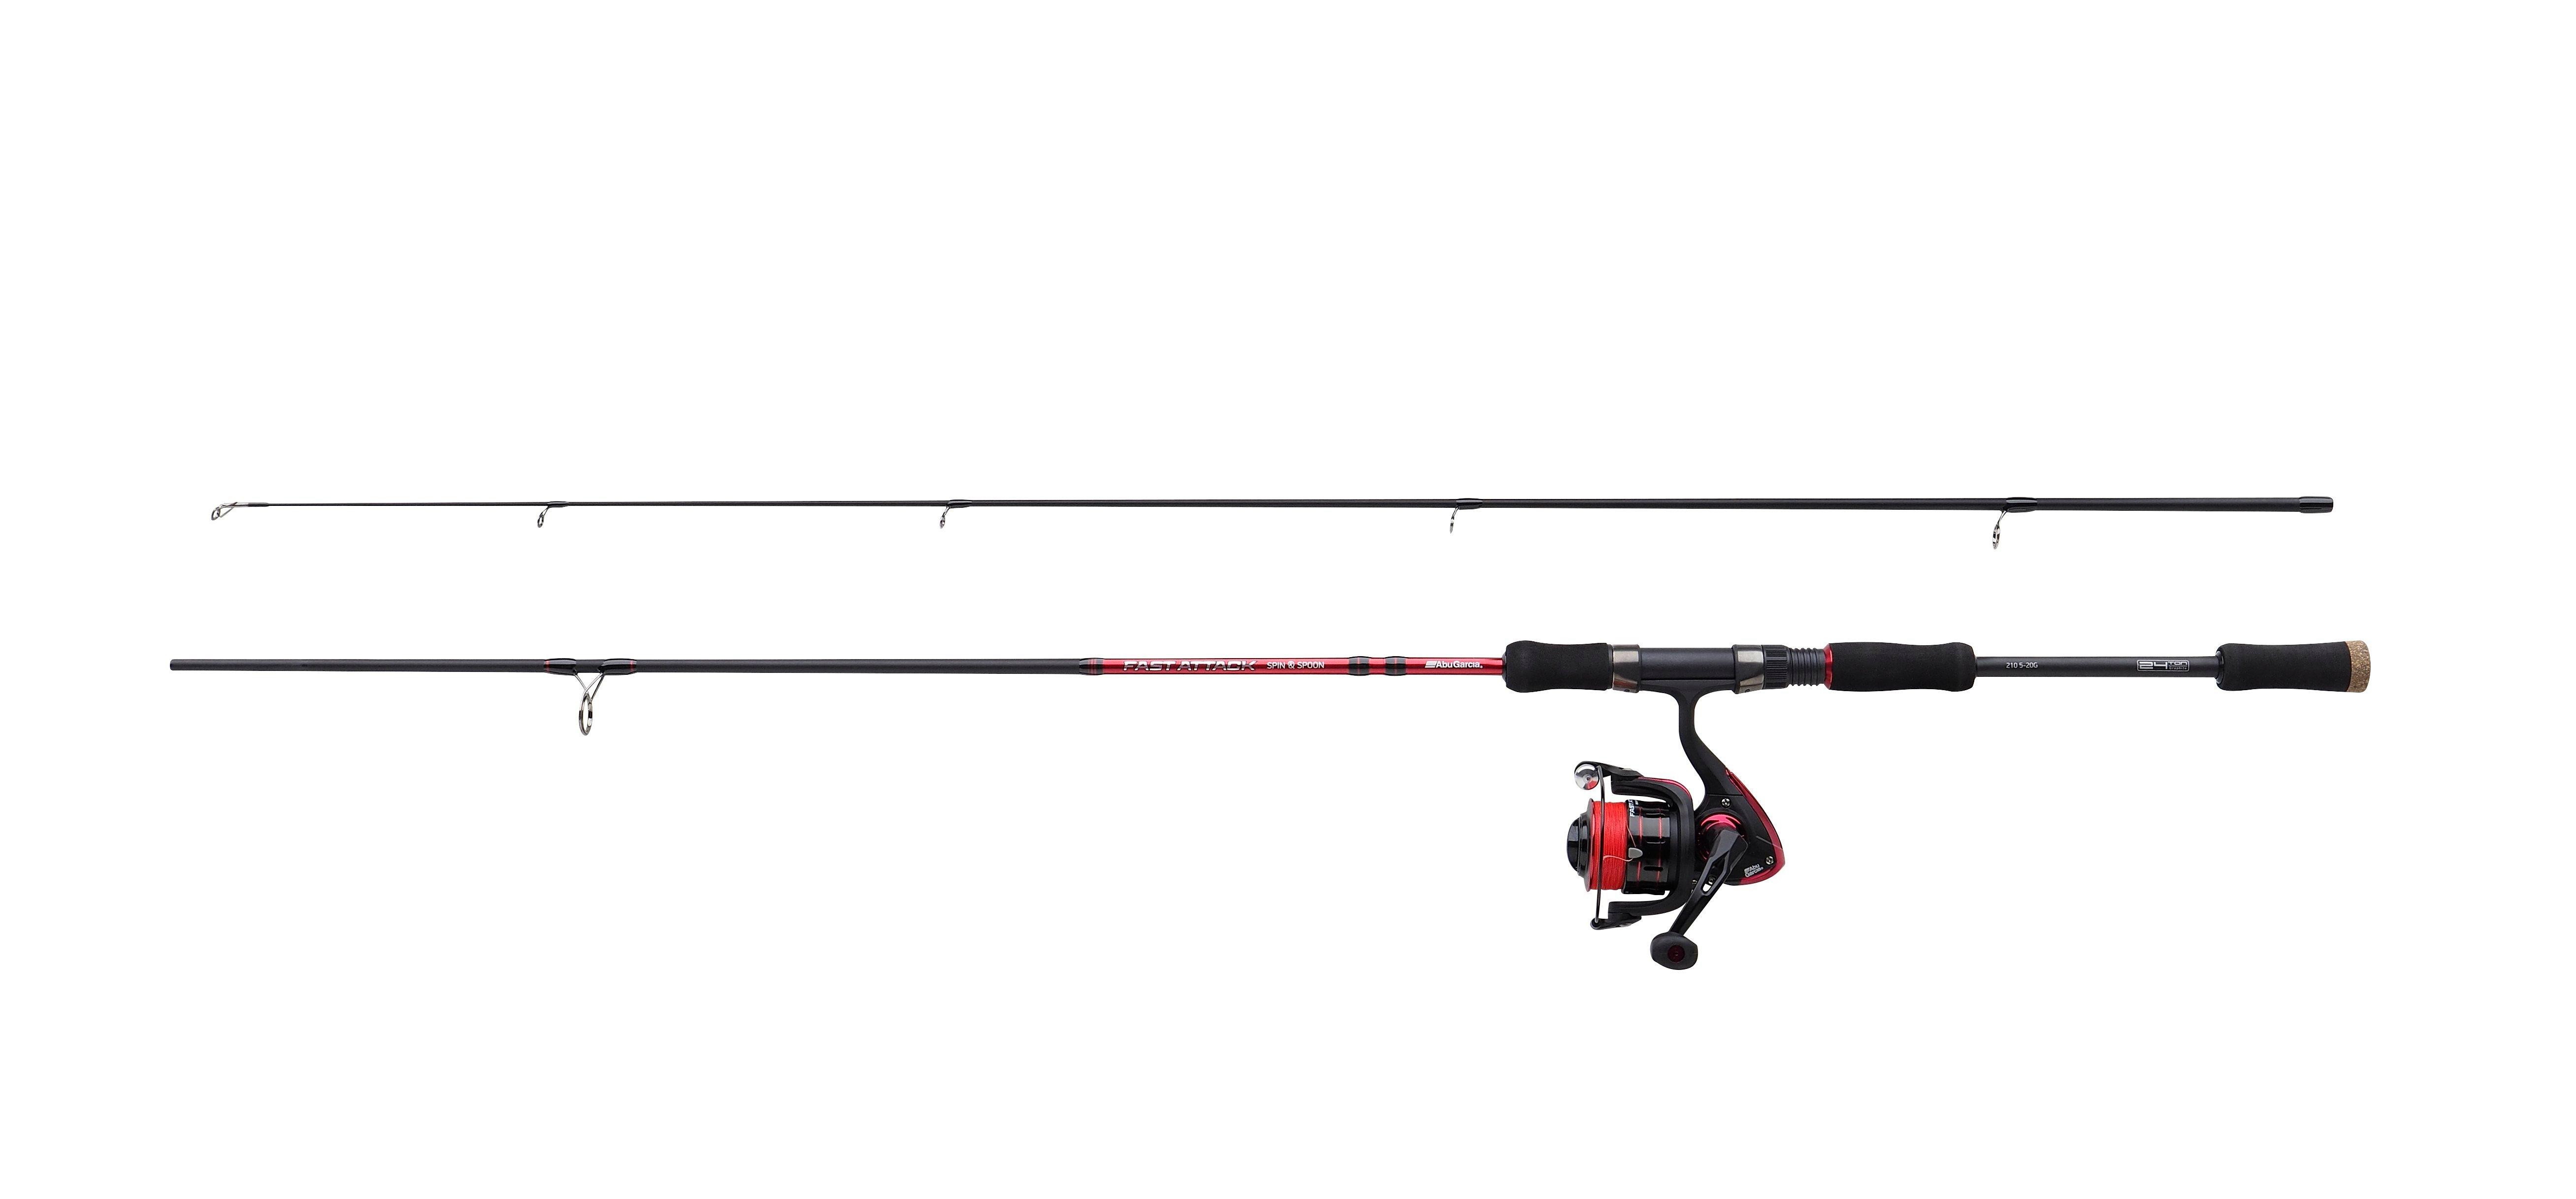 6’6” Black Max Fishing Rod and Reel Spinning Combo